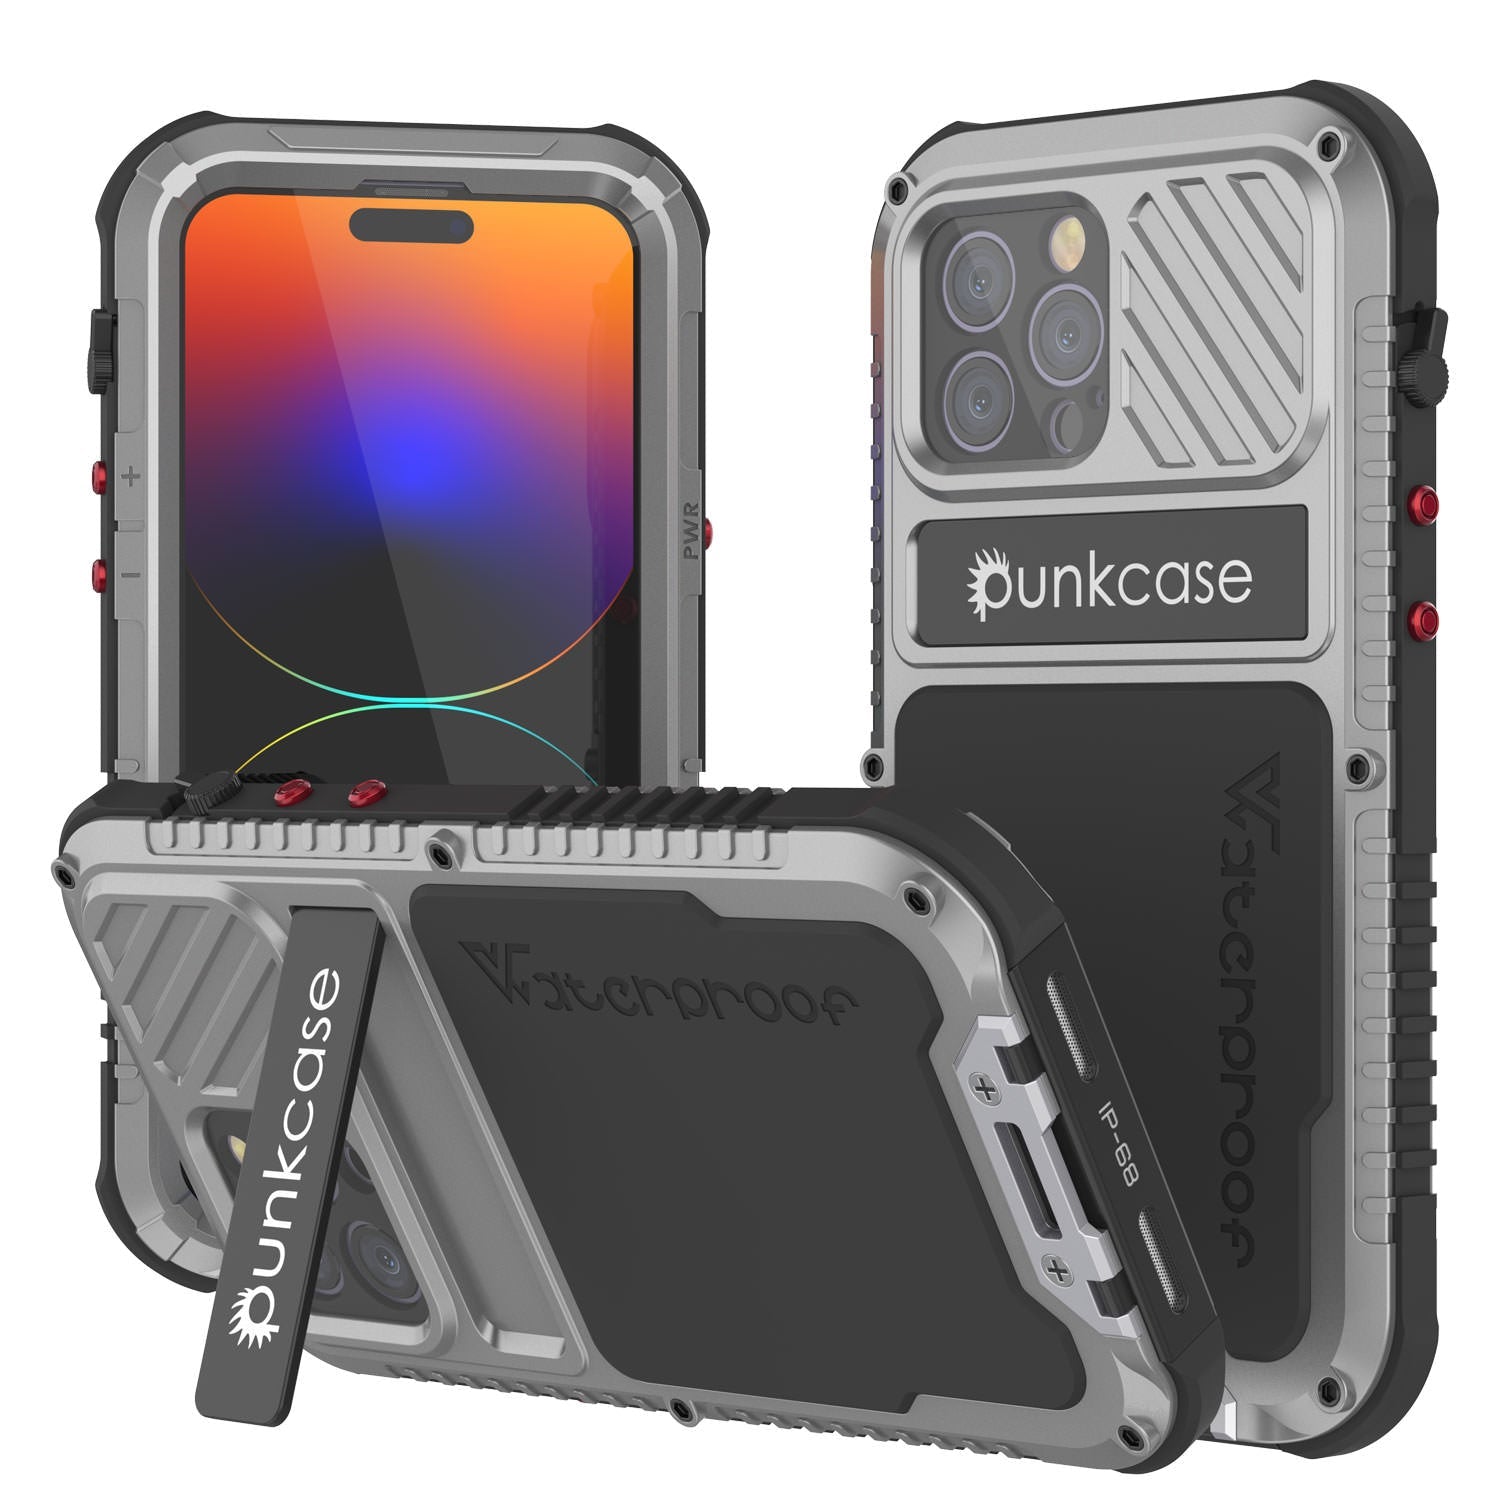 iPhone 14 Pro Max Metal Extreme 3.0 Case, Heavy Duty Military Grade Armor Cover [shock proof] Waterproof Aluminum Case [Silver]